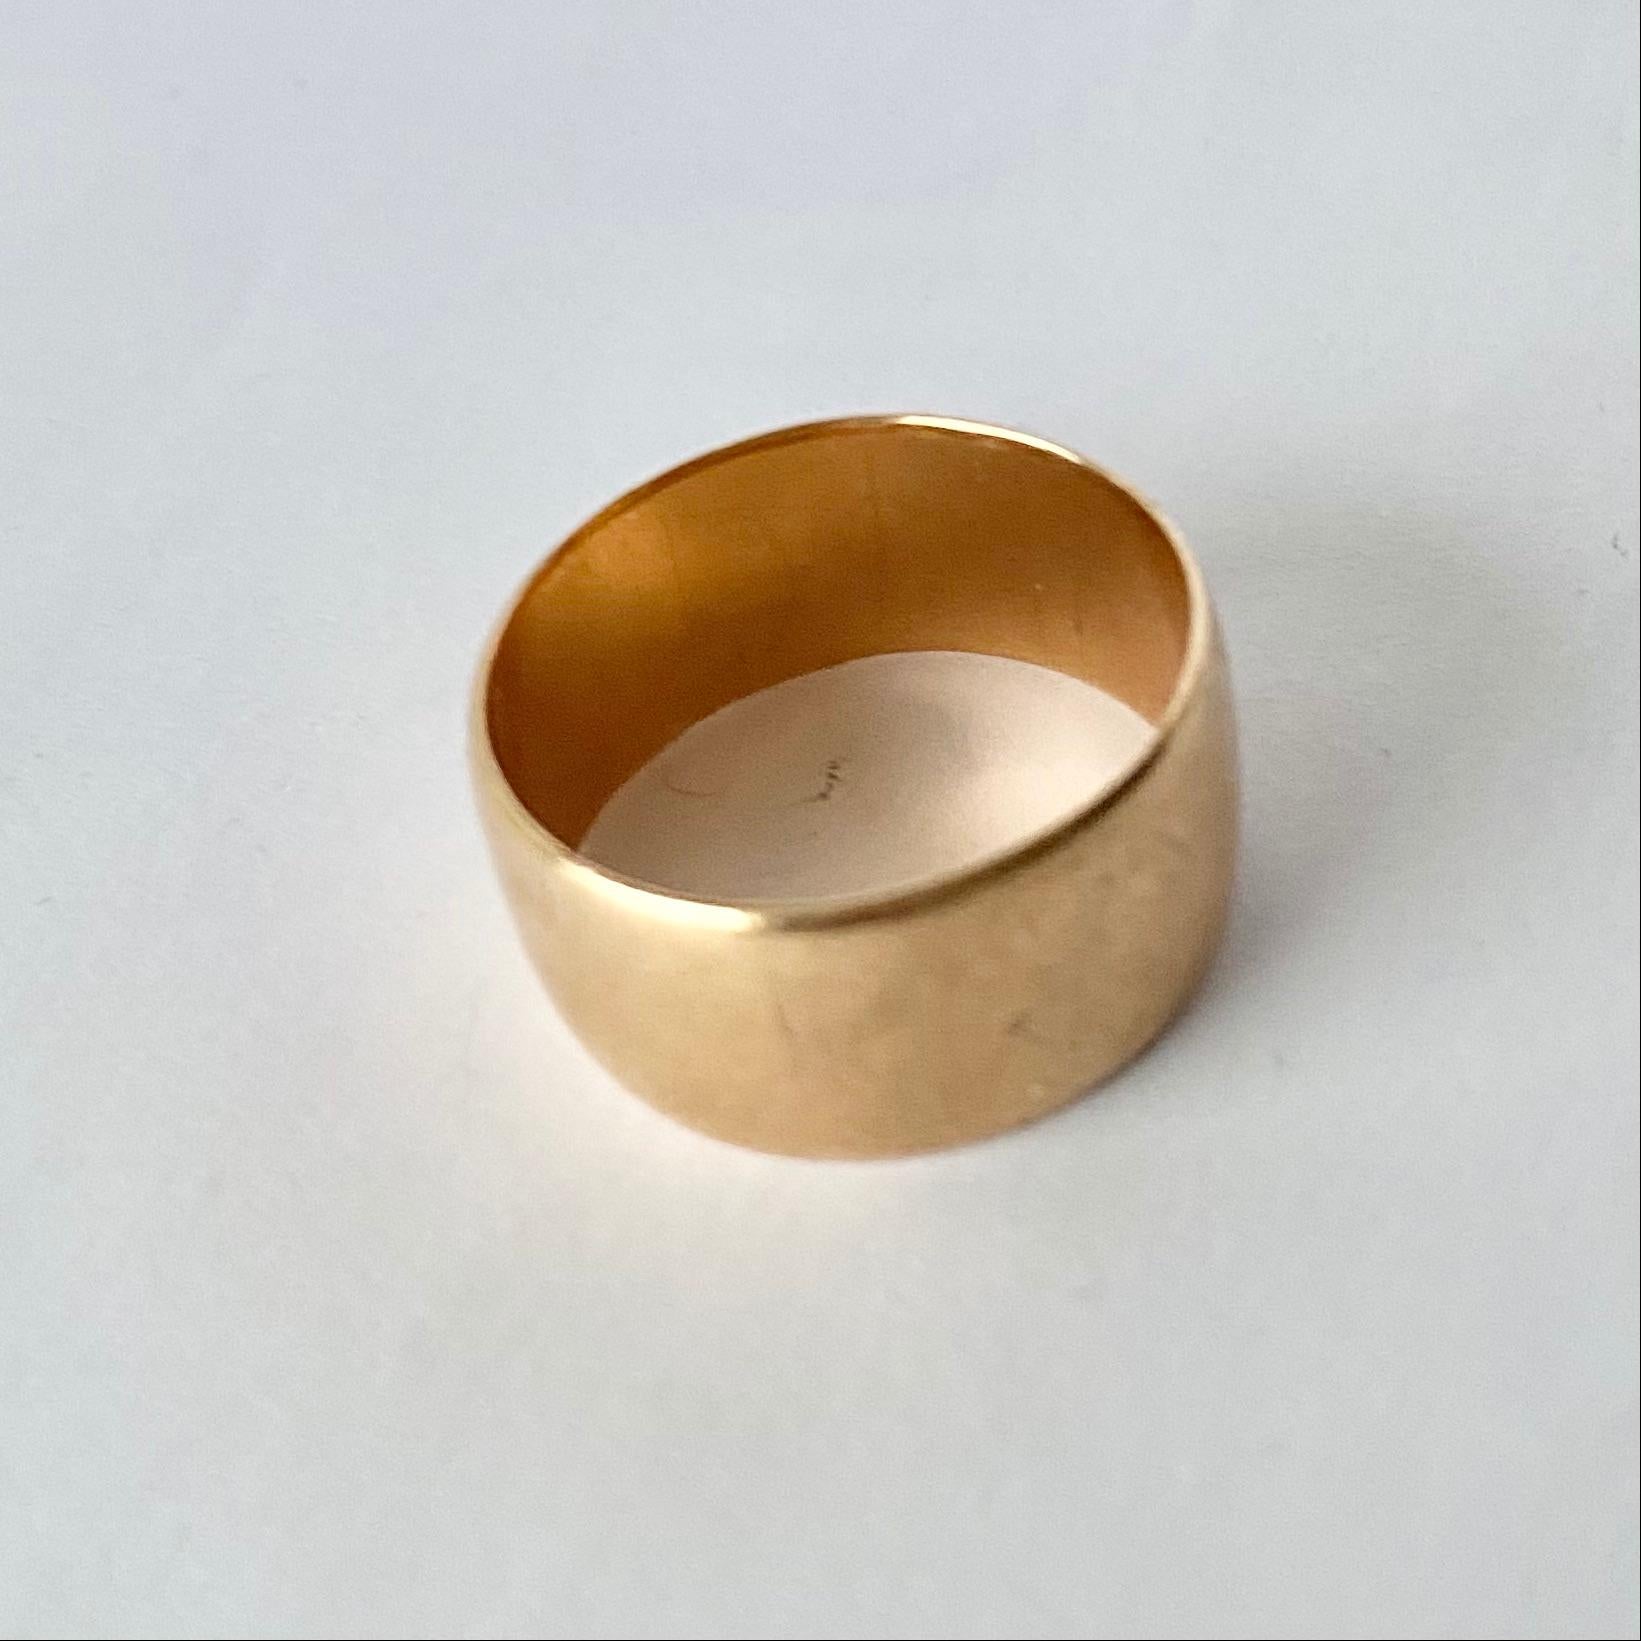 This band is plain and modelled in glossy 9ct gold. It could be worn as an every day ring or a classic wedding ring. 

Ring Size: S or 9 1/4  
Band Width: 10mm 

Weight: 6.8g